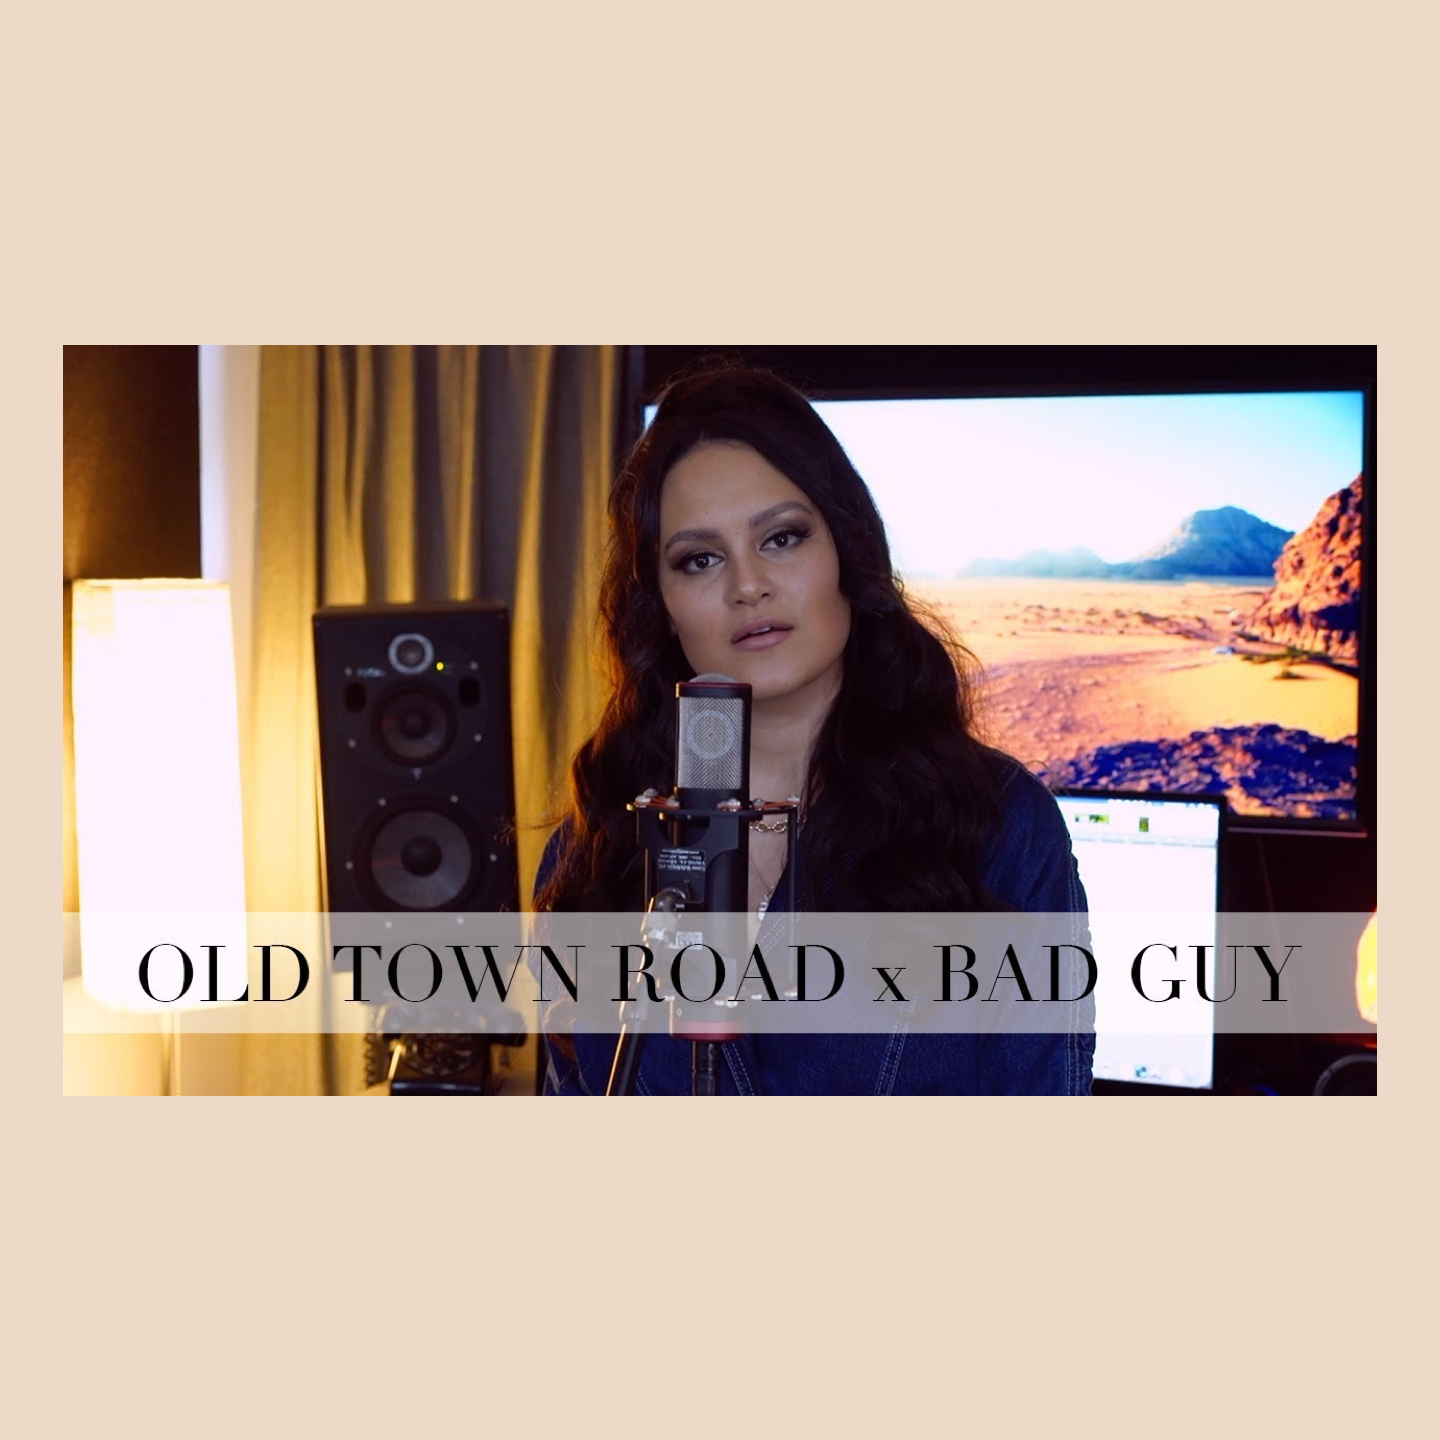 Old Town Road / Bad Guy (Mashup) -
                    Luxe radio